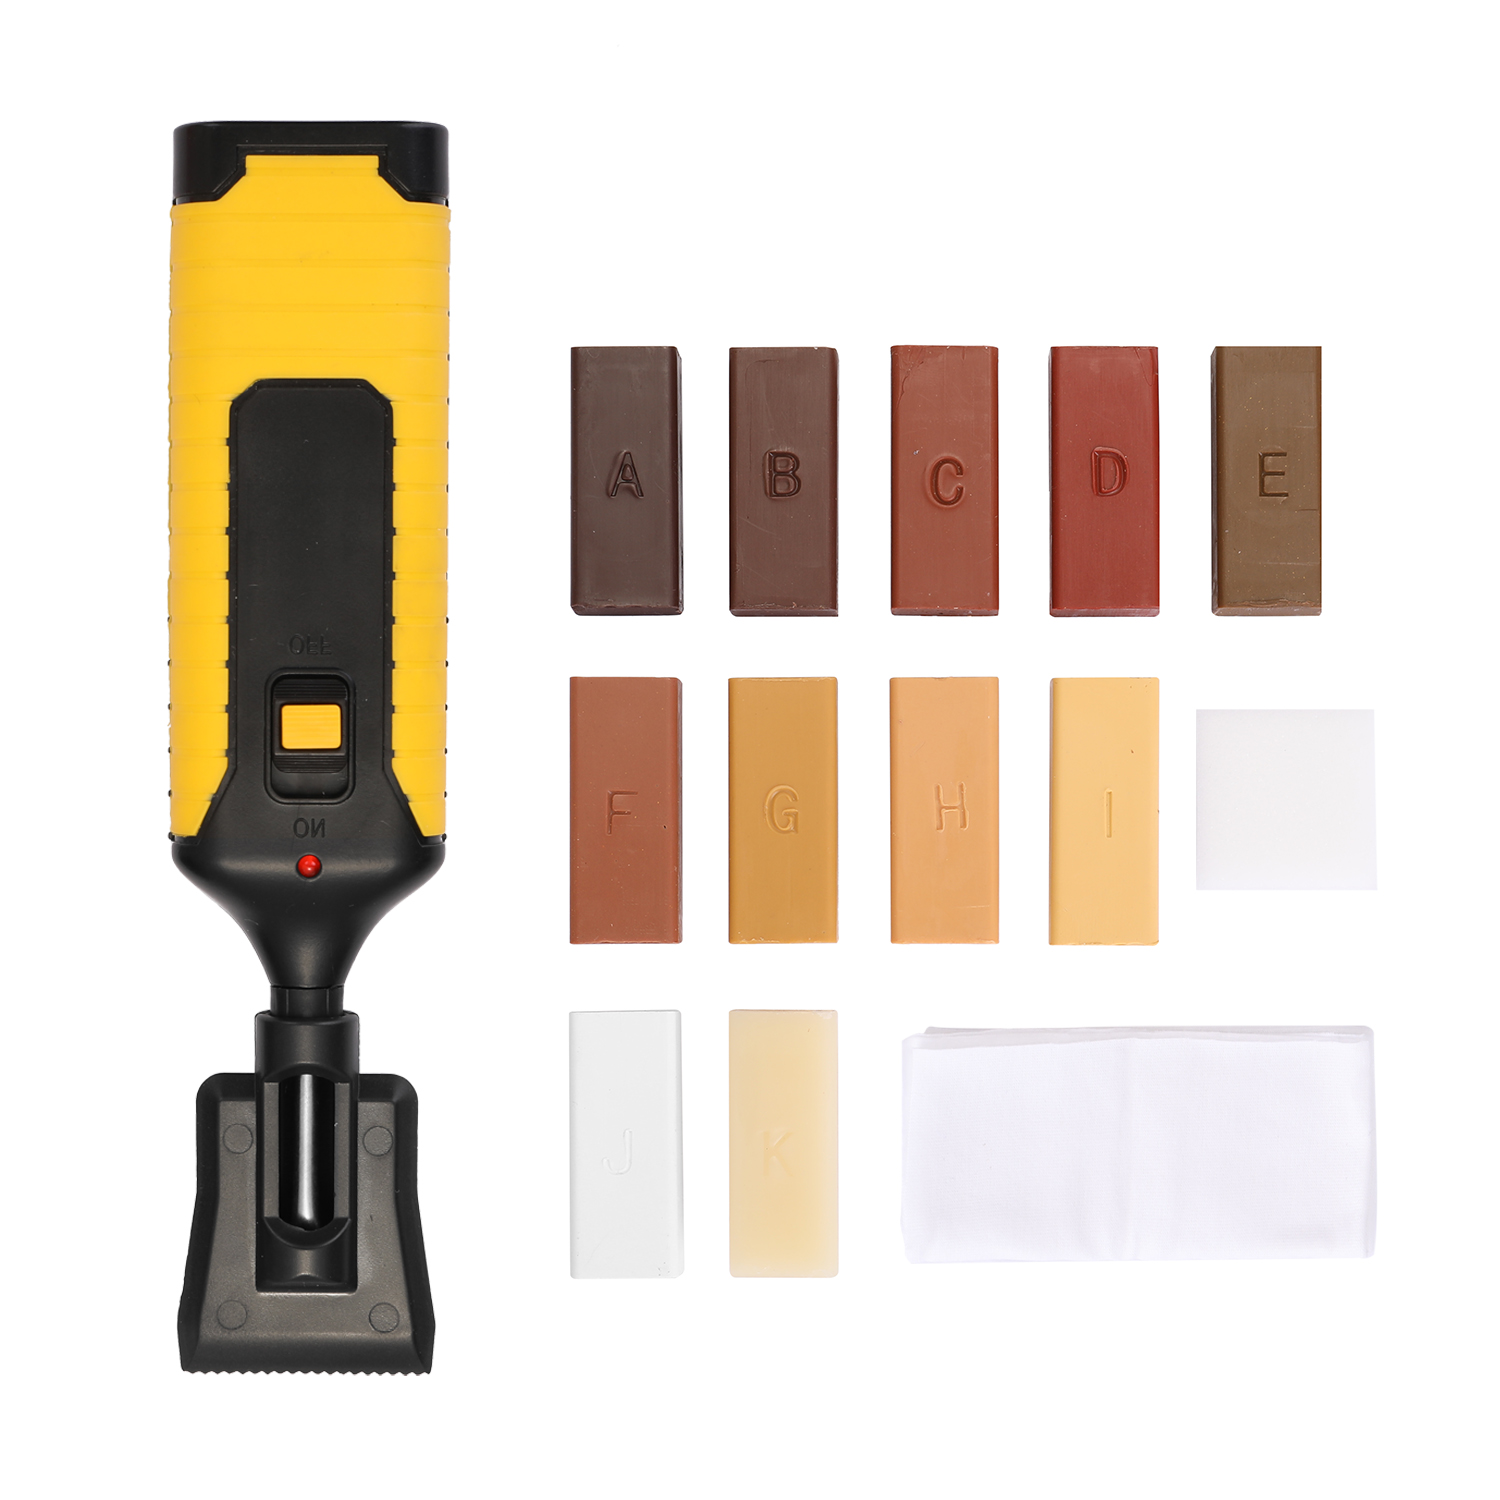 Laminate Repairing Kit Wax System Floor Worktop Sturdy Casing Chips Scratches Mending Tool Set For Use In The Home, Caravan